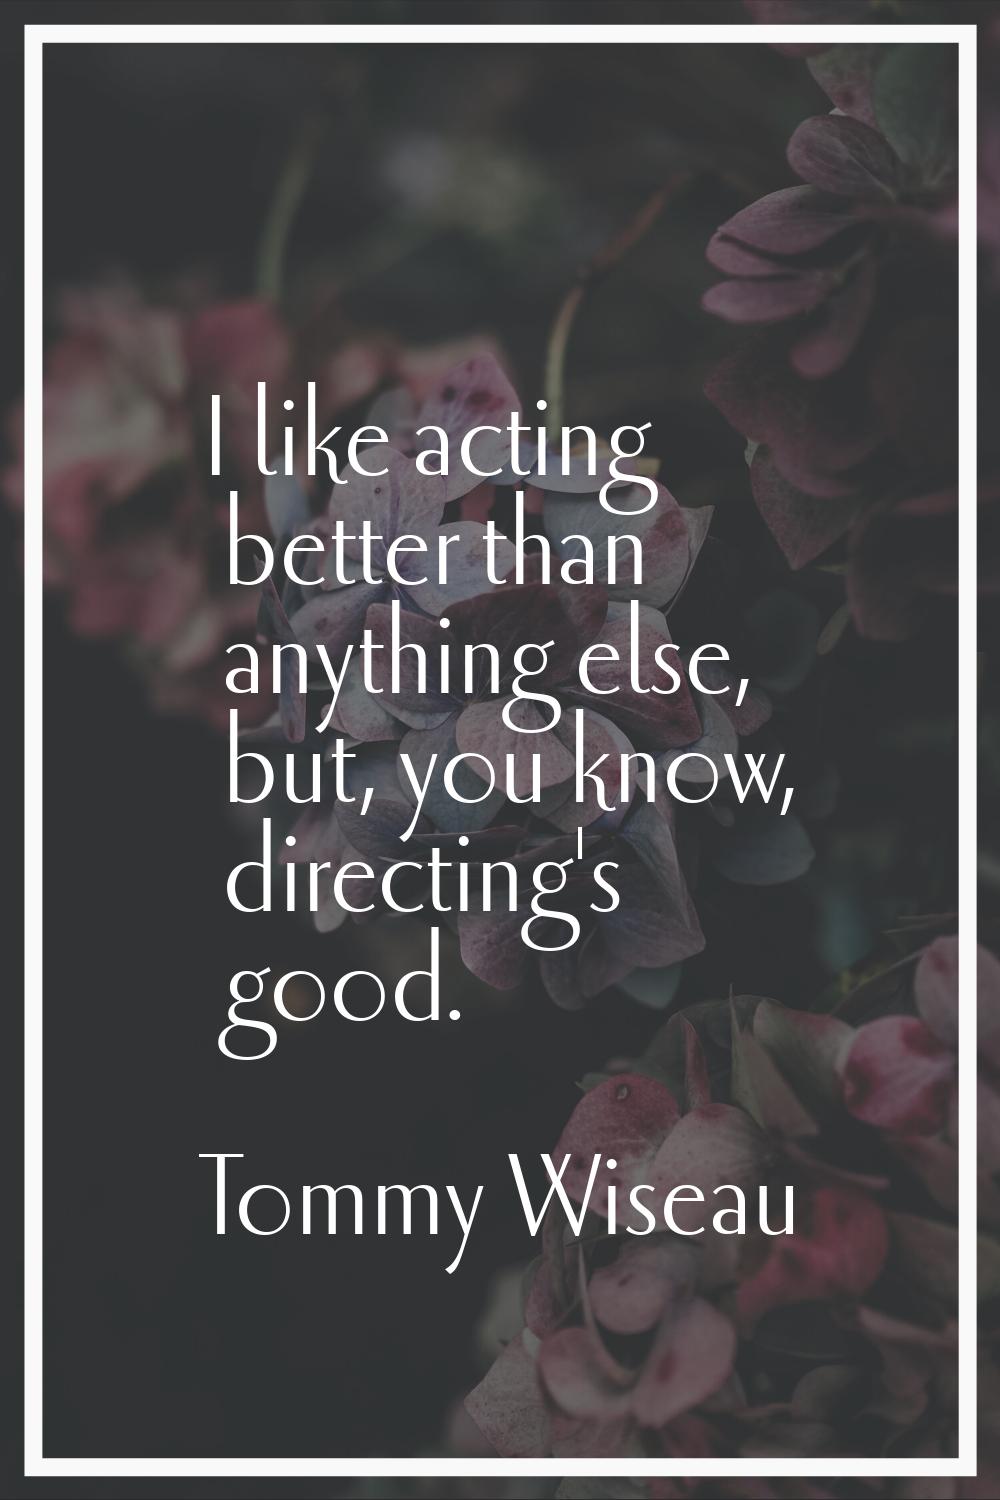 I like acting better than anything else, but, you know, directing's good.